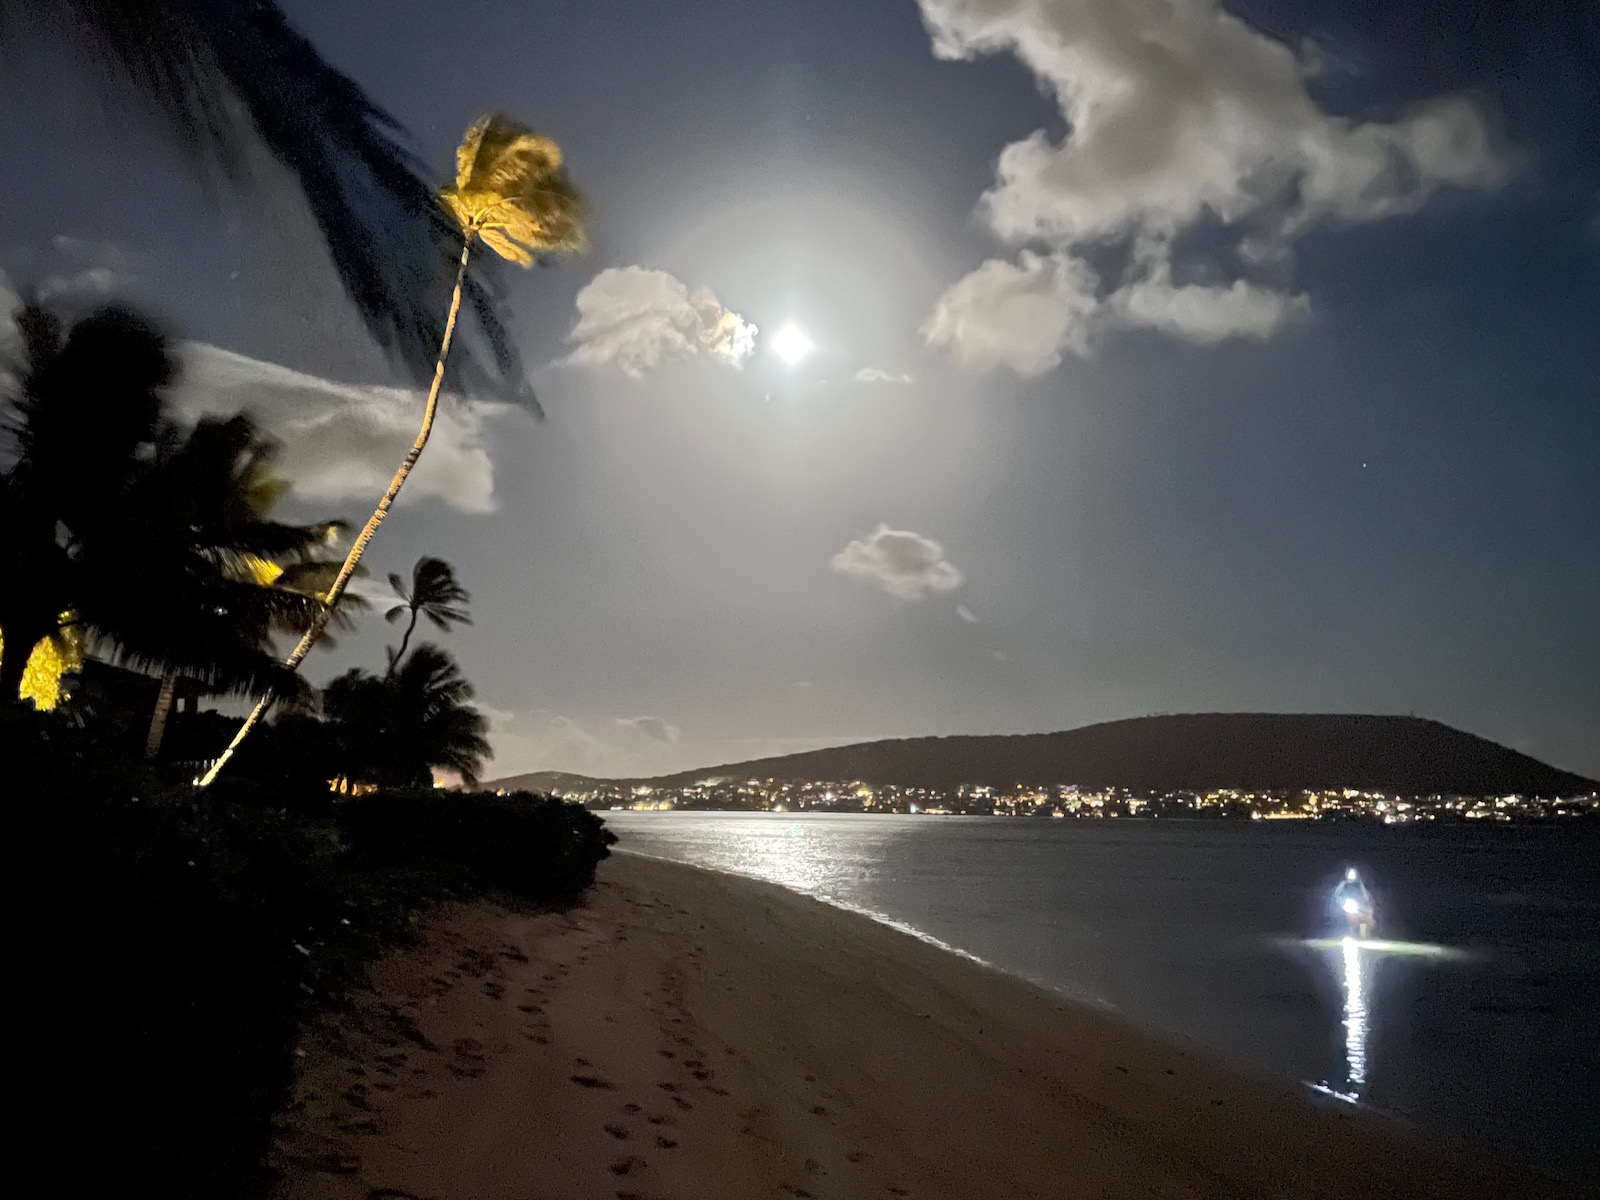 night scene showing a person torch fishing along the Hawaiian coastline under a full moon and palm tree